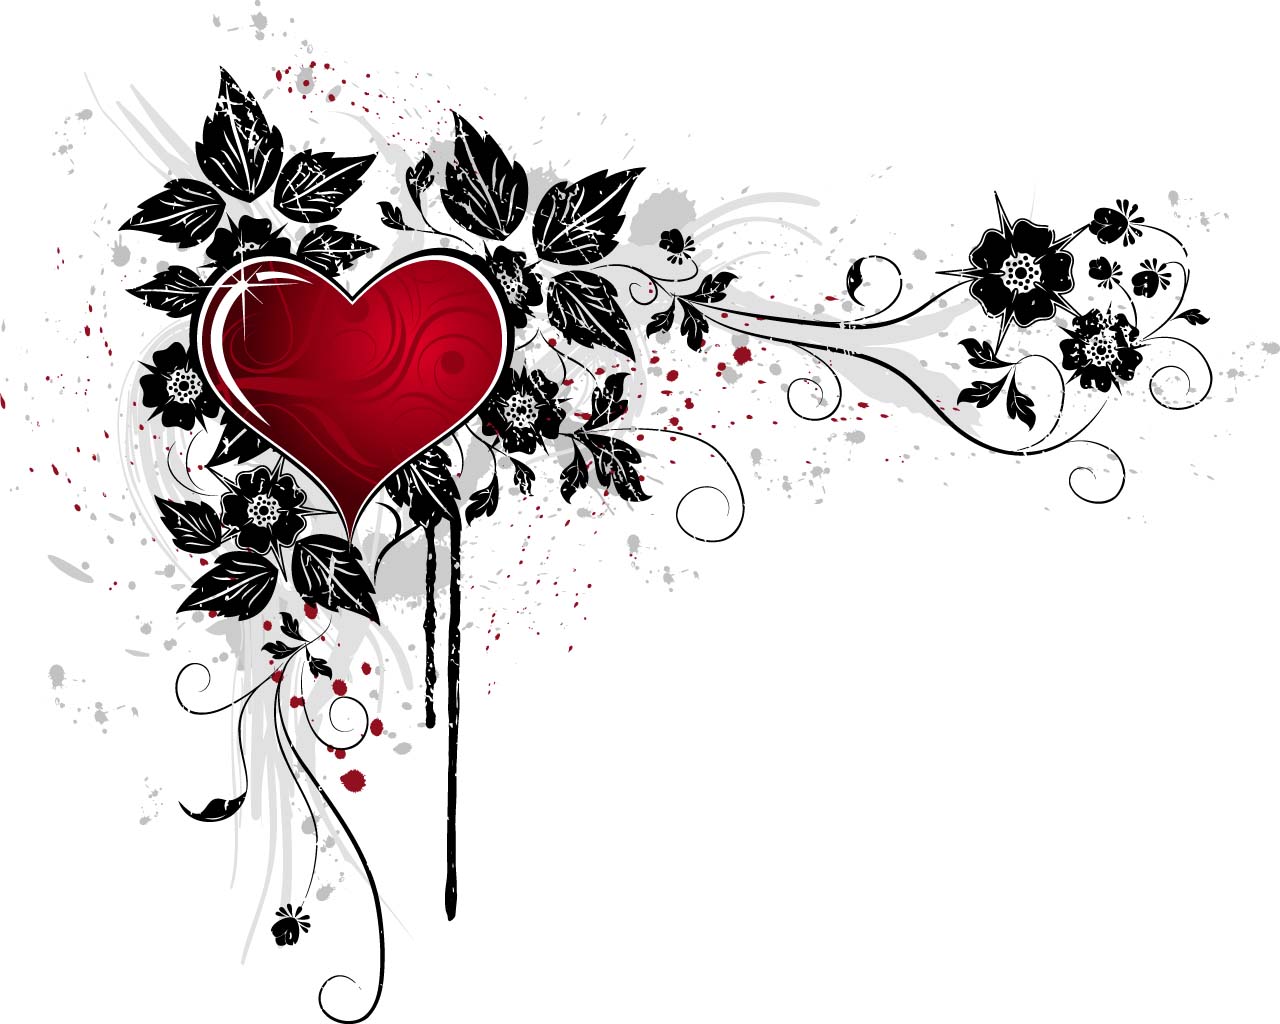 Grunge heart with floral background vector